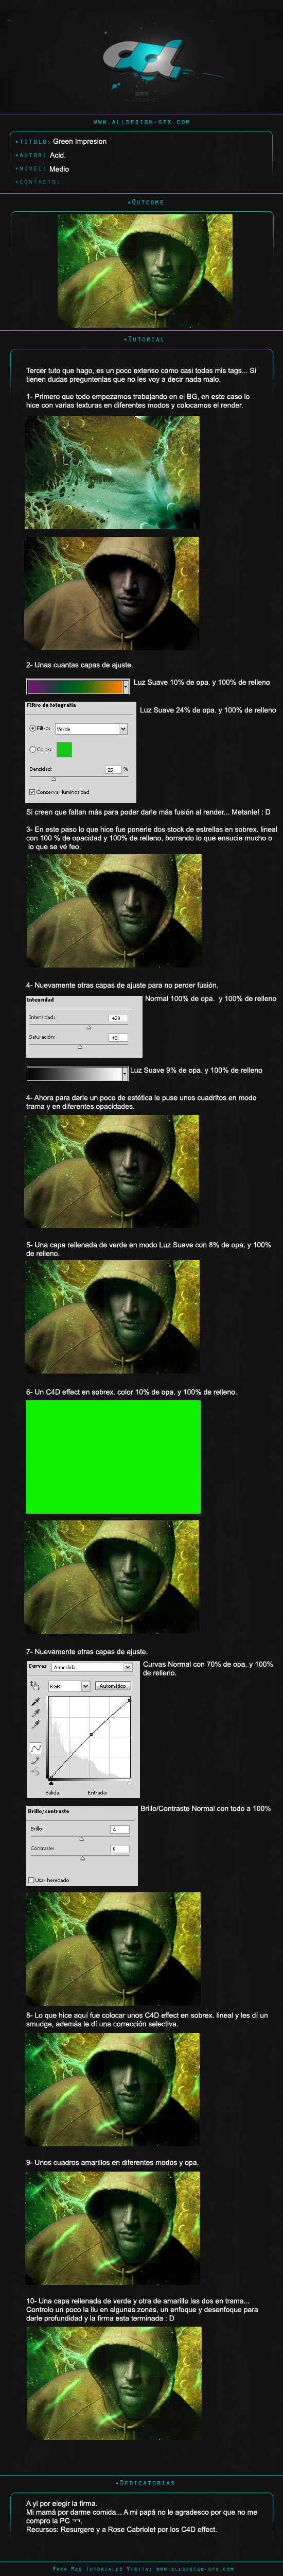 Green_Impresion___Tutorial_by_Llulian.png